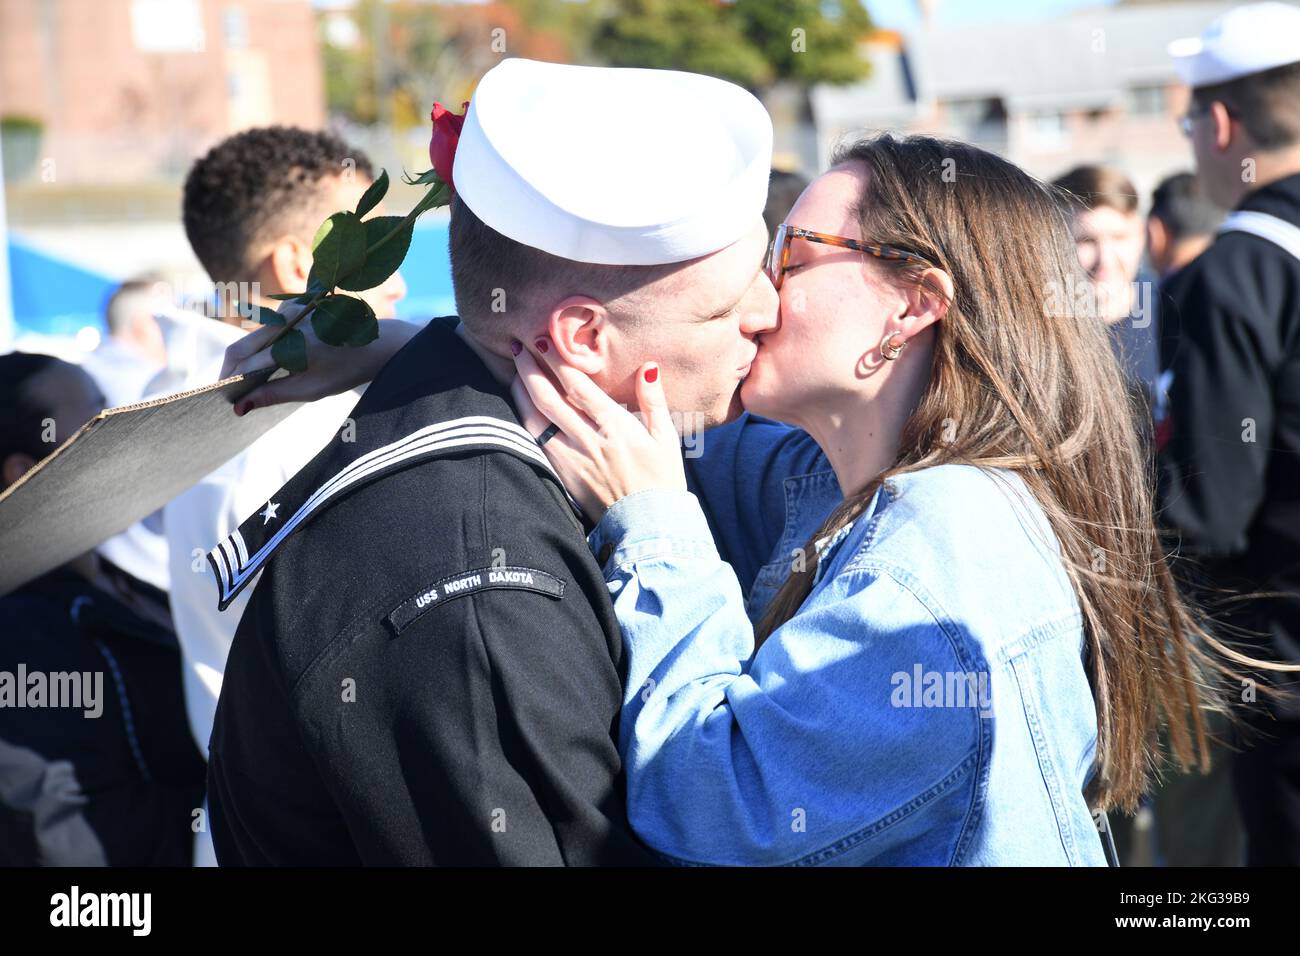 221027-N-GR655-0142 GROTON, Conn. (October 27, 2022) – An sailor assigned to the USS North Dakota (SSN 784) embraces his loved one during a homecoming event at Naval Submarine Base New London in Groton, Conn., Oct. 27. North Dakota returned to homeport from its 3rd full deployment since commissioning in support of the Navy's maritime strategy - supporting national security interests and maritime security operations - in the 6th Fleet area of operations. The Virginia-class fast attack submarine USS North Dakota and crew operate under Submarine Squadron (SUBRON) FOUR and its primary mission is t Stock Photo